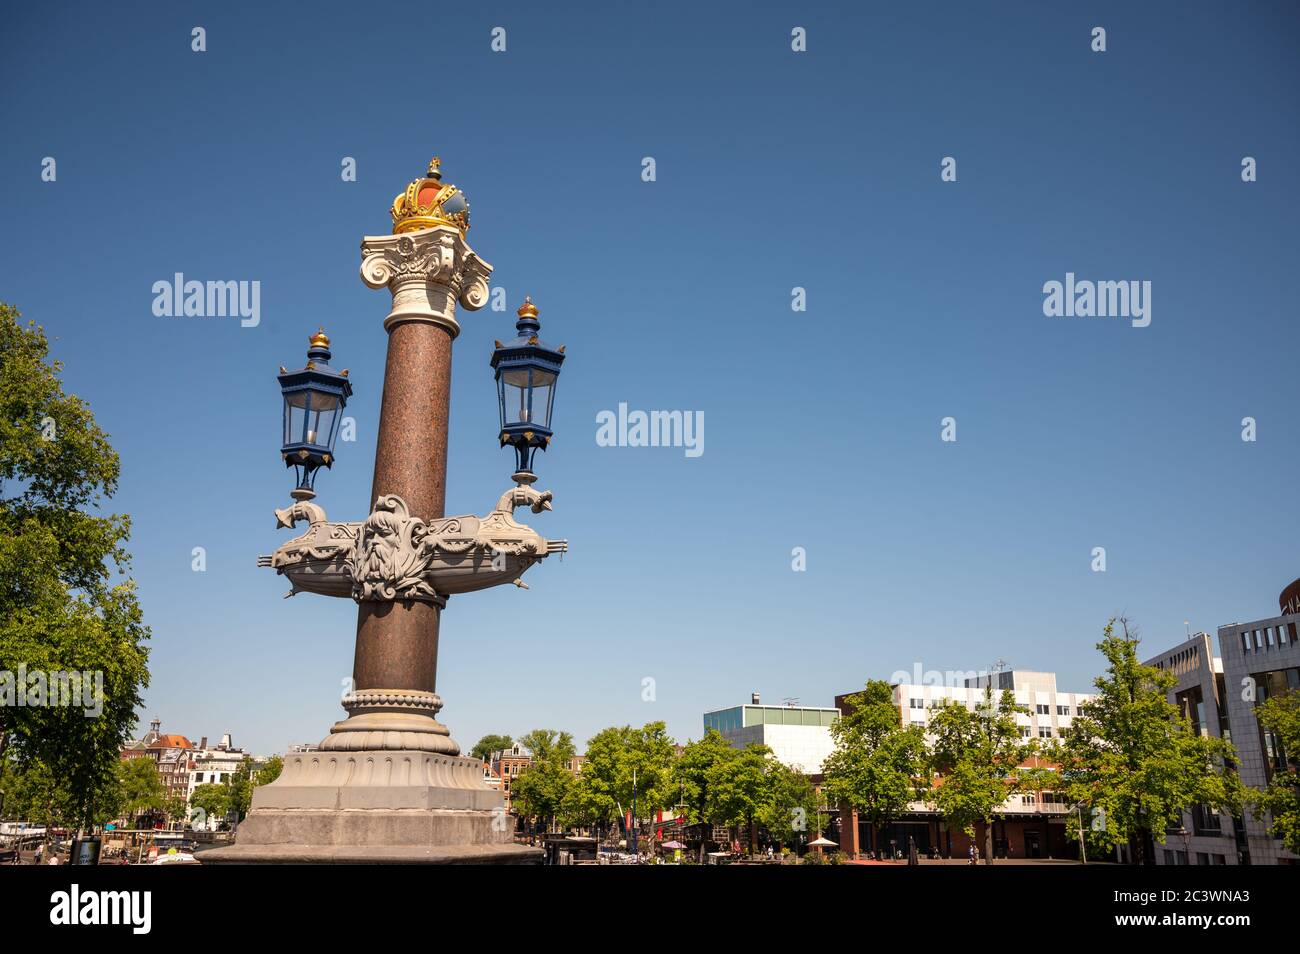 Adornments of royal crown on top of the pillar and lights on Blauwbrug over the river Amstel in Amsterdam, Netherlands Stock Photo